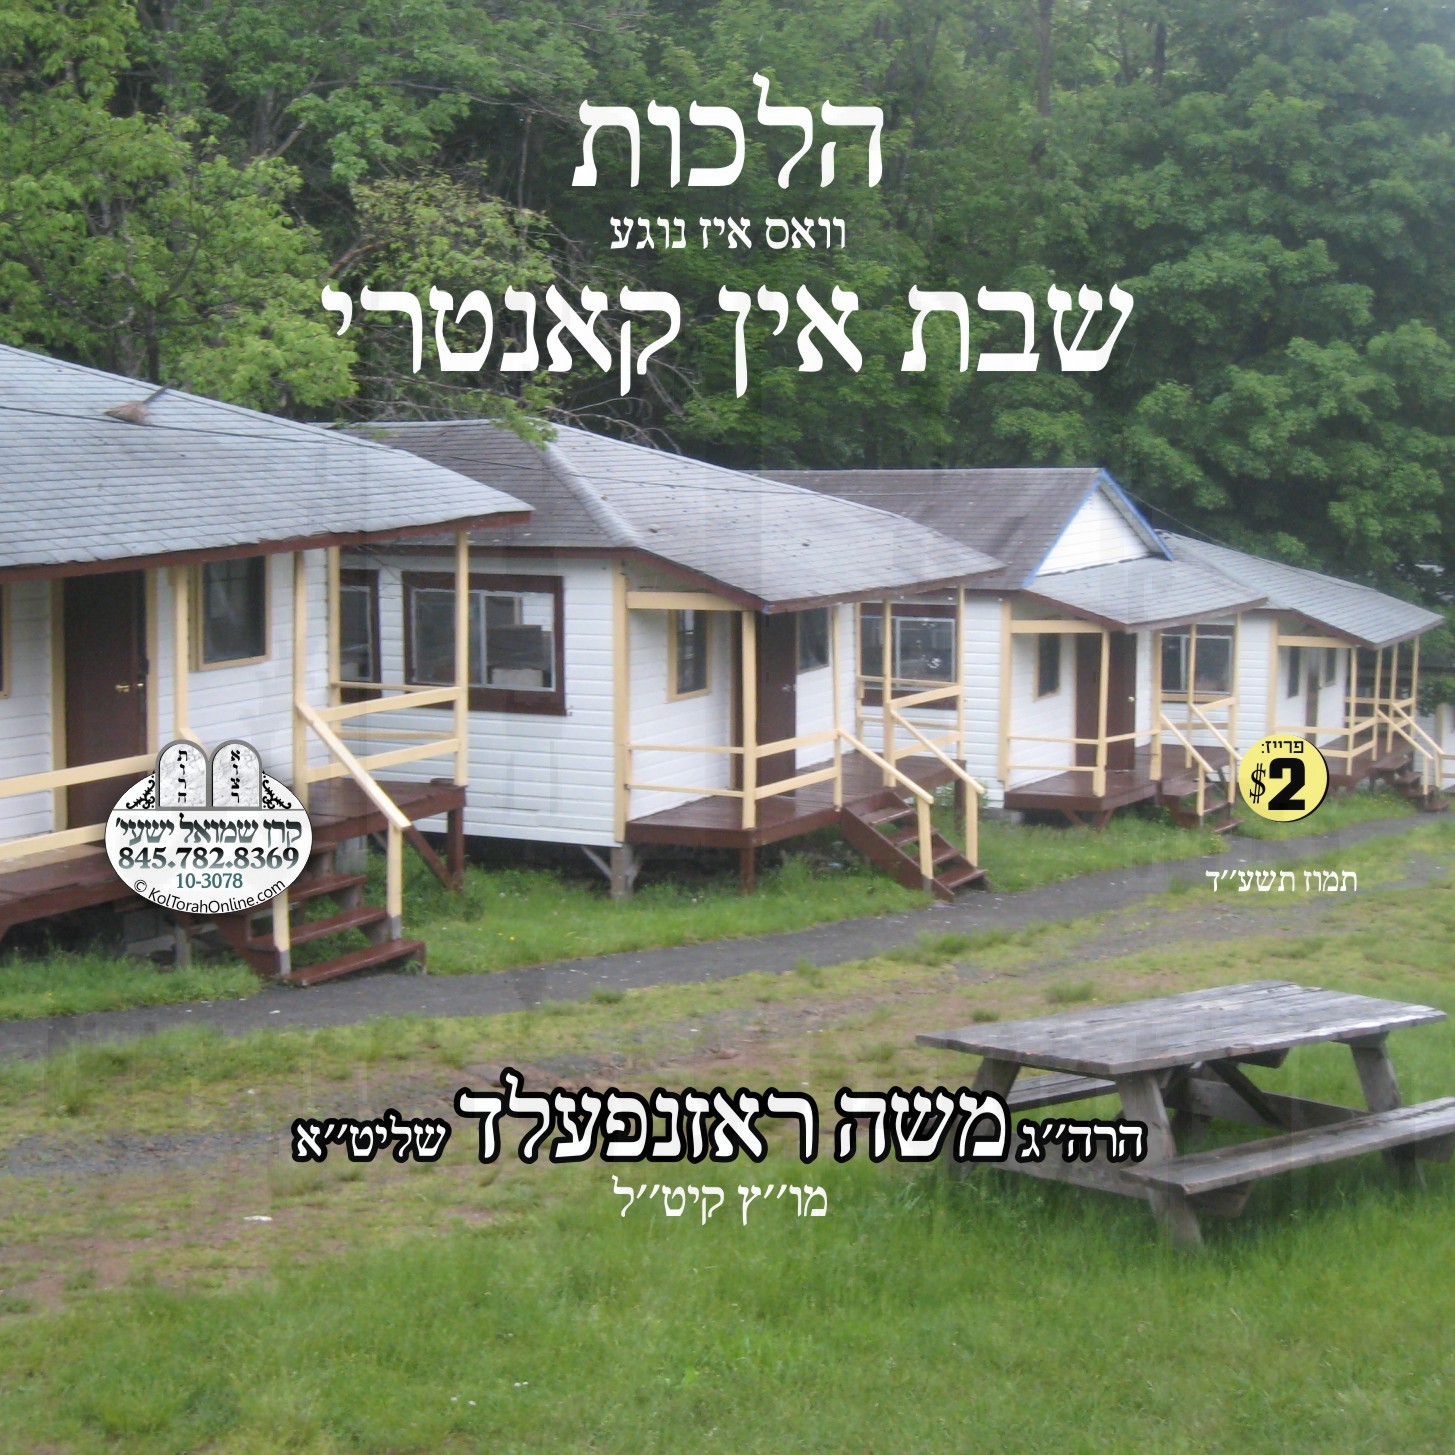 HILCHOS SHABBOS IN COUNTRY